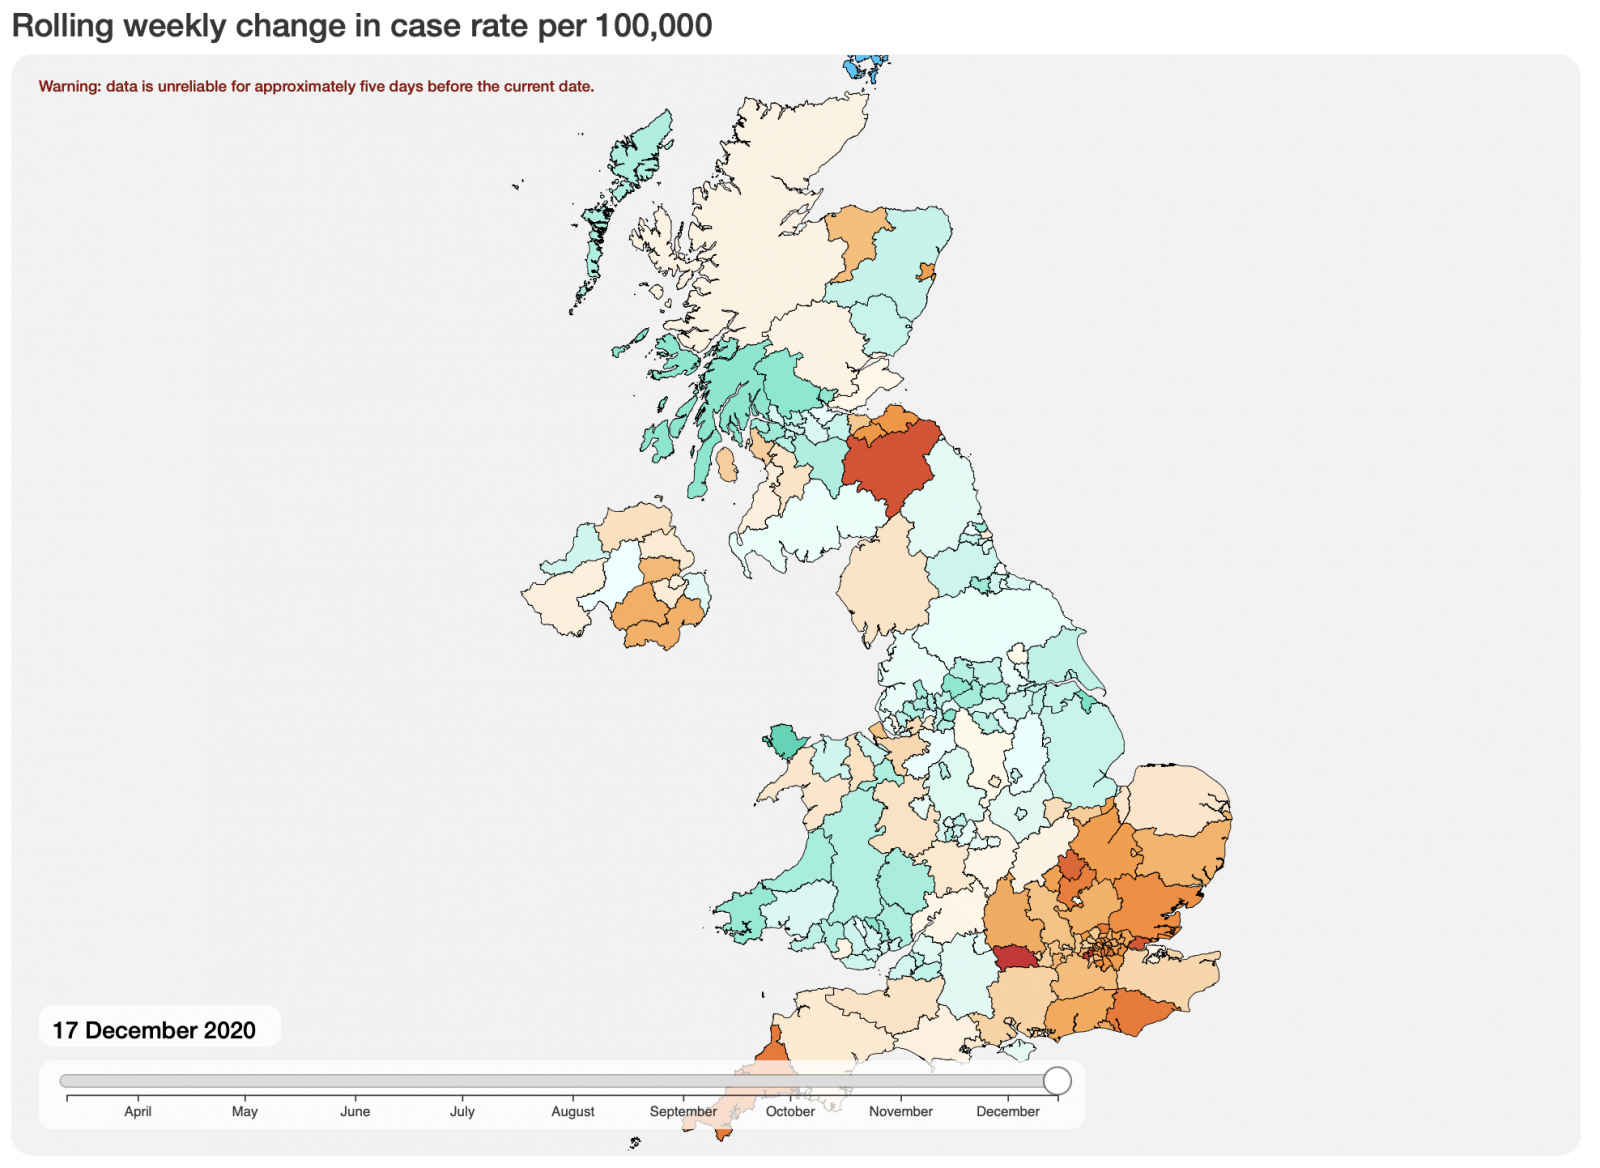 2020-12-15 UK Rolling Change in Case Rate per 100k populaiton